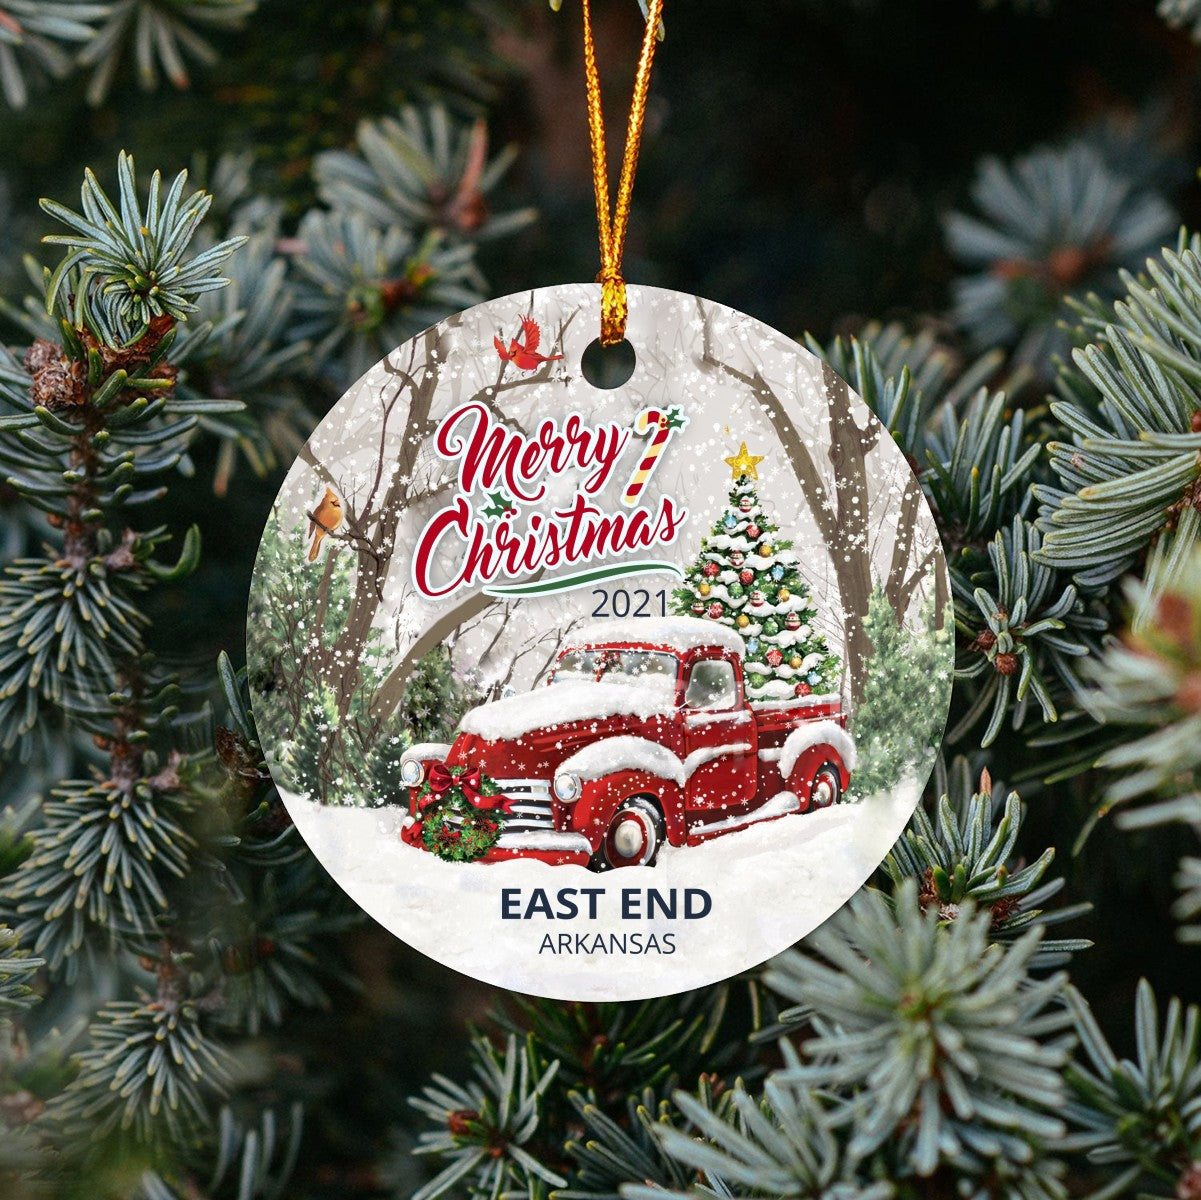 Christmas Tree Ornaments East End - Ornament With Name City, State East End Arkansas AR Ornament - Red Truck Xmas Ornaments 3'' Plastic Gift For Family, Friend And Housewarming